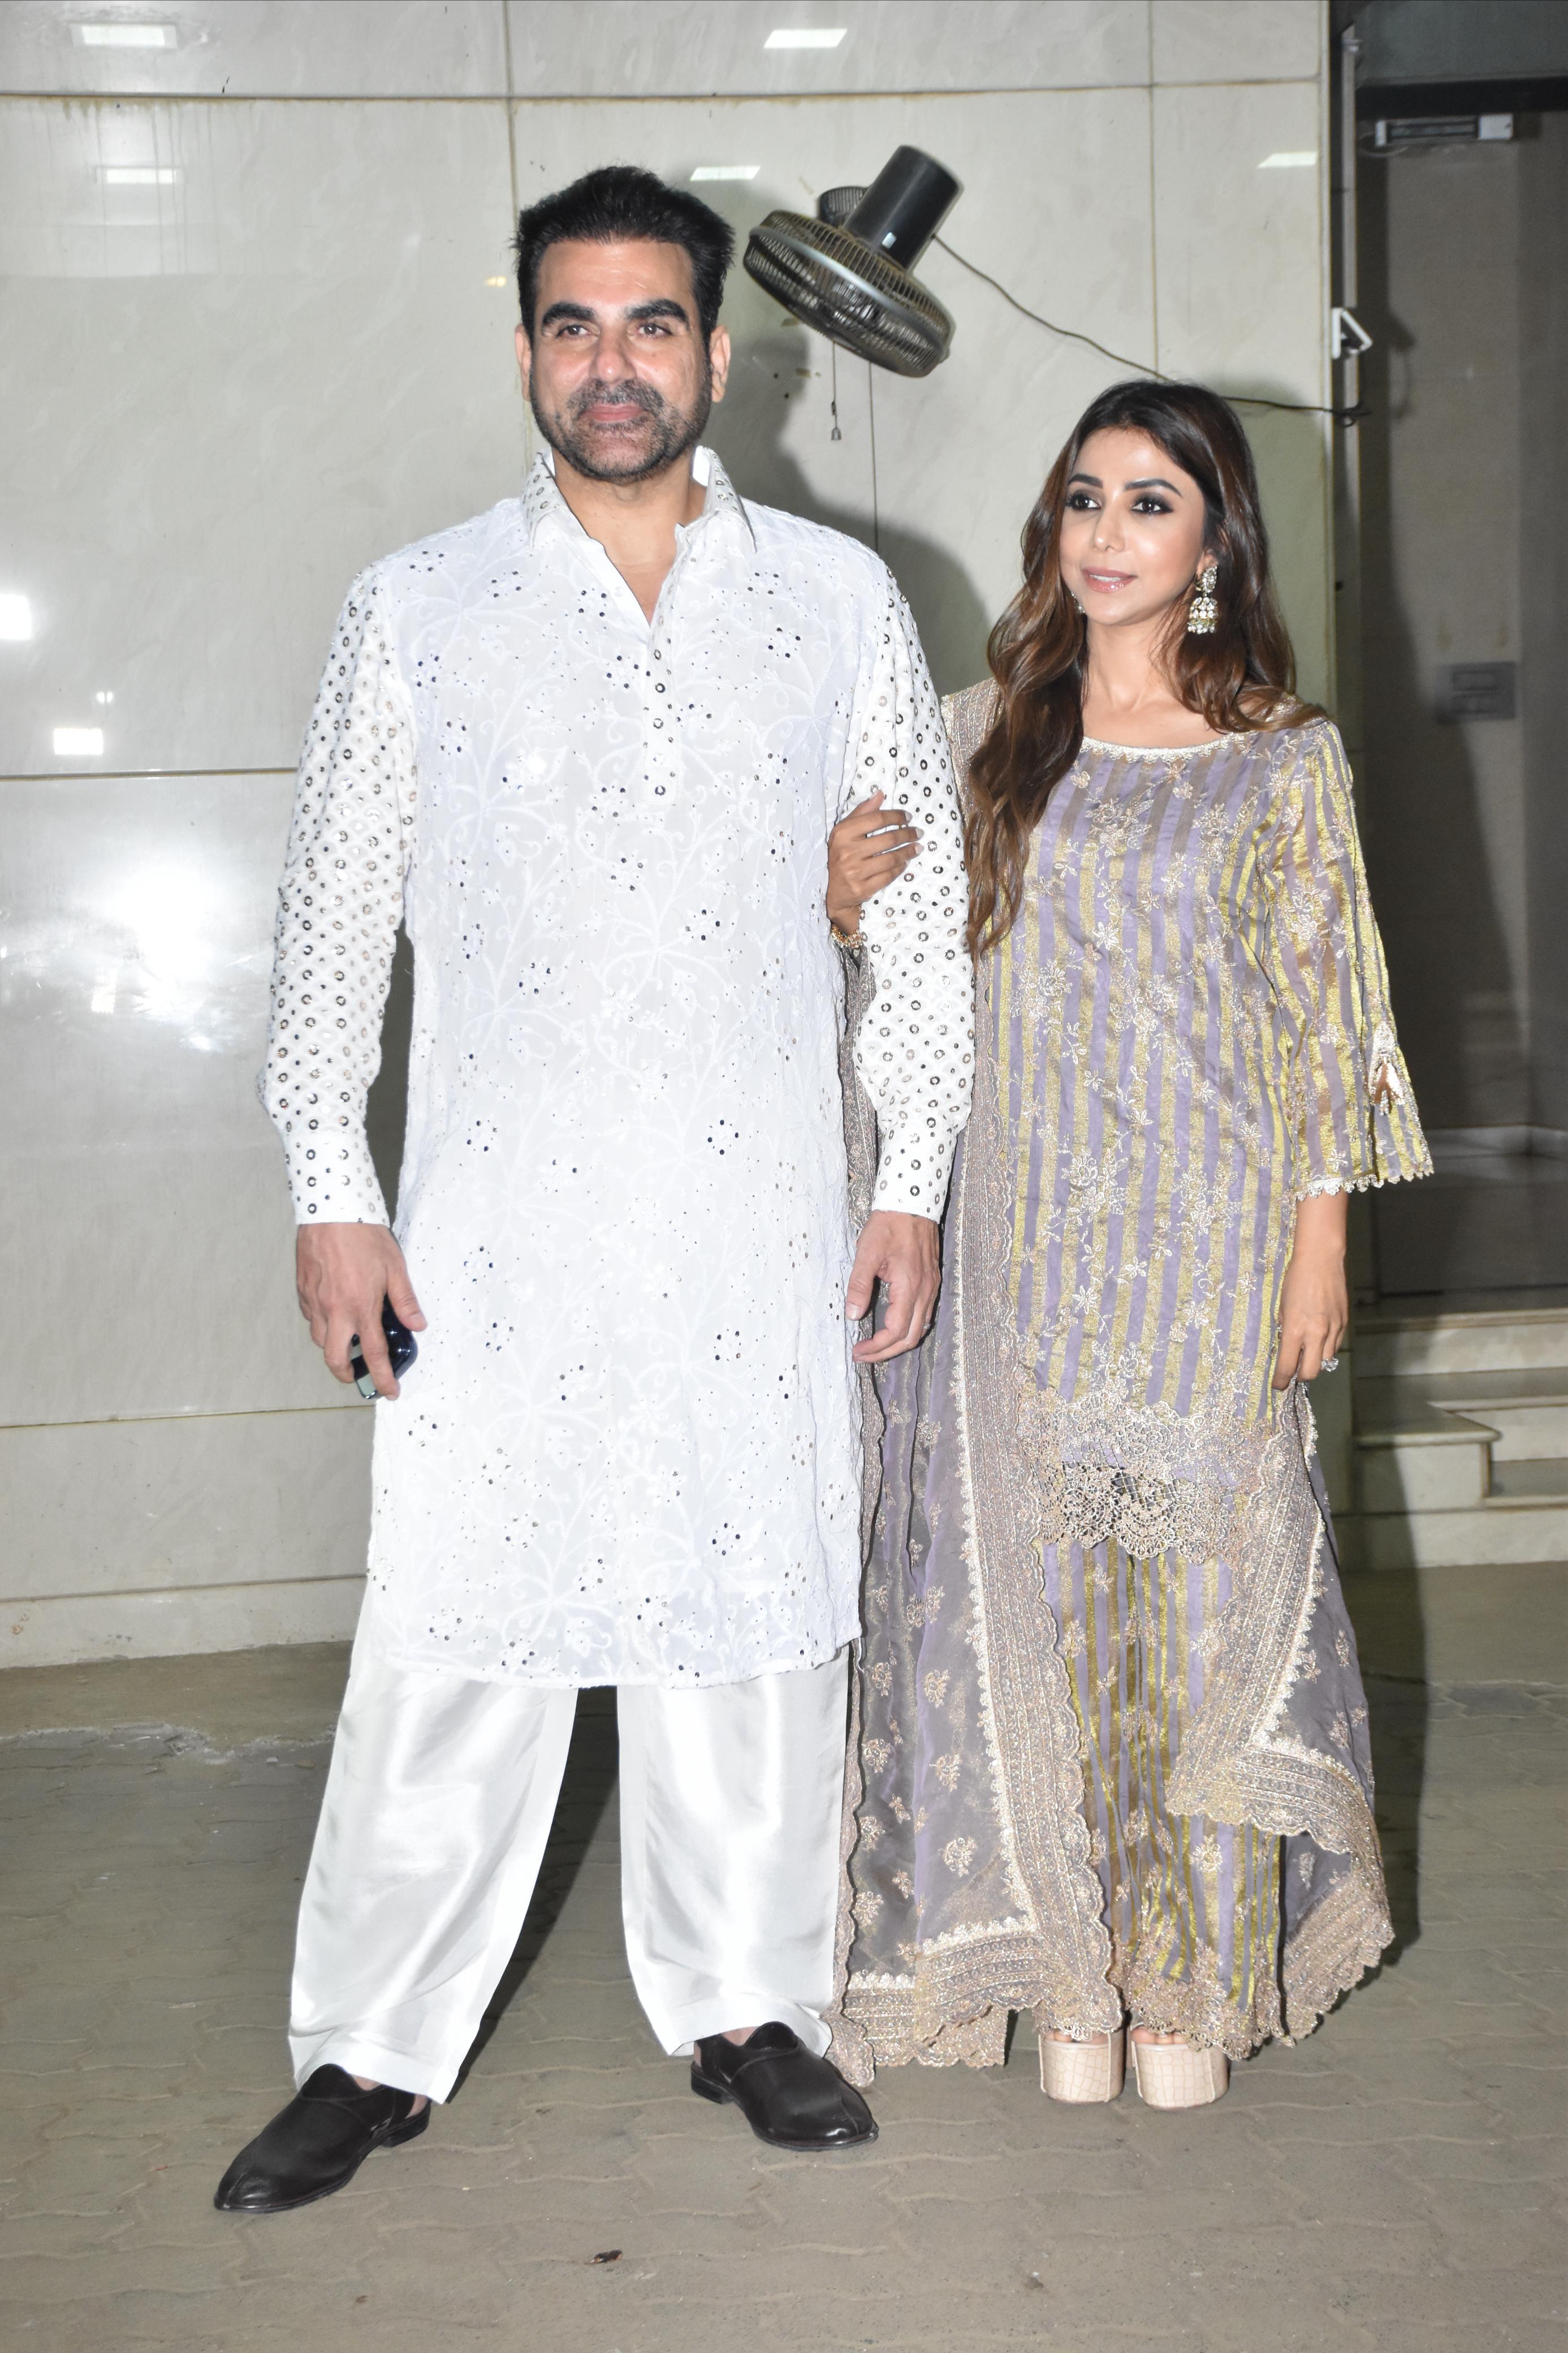 Newlyweds Arbaaz Khan and Sshura were seen walking hand-in-hand as they went to attend the eid party